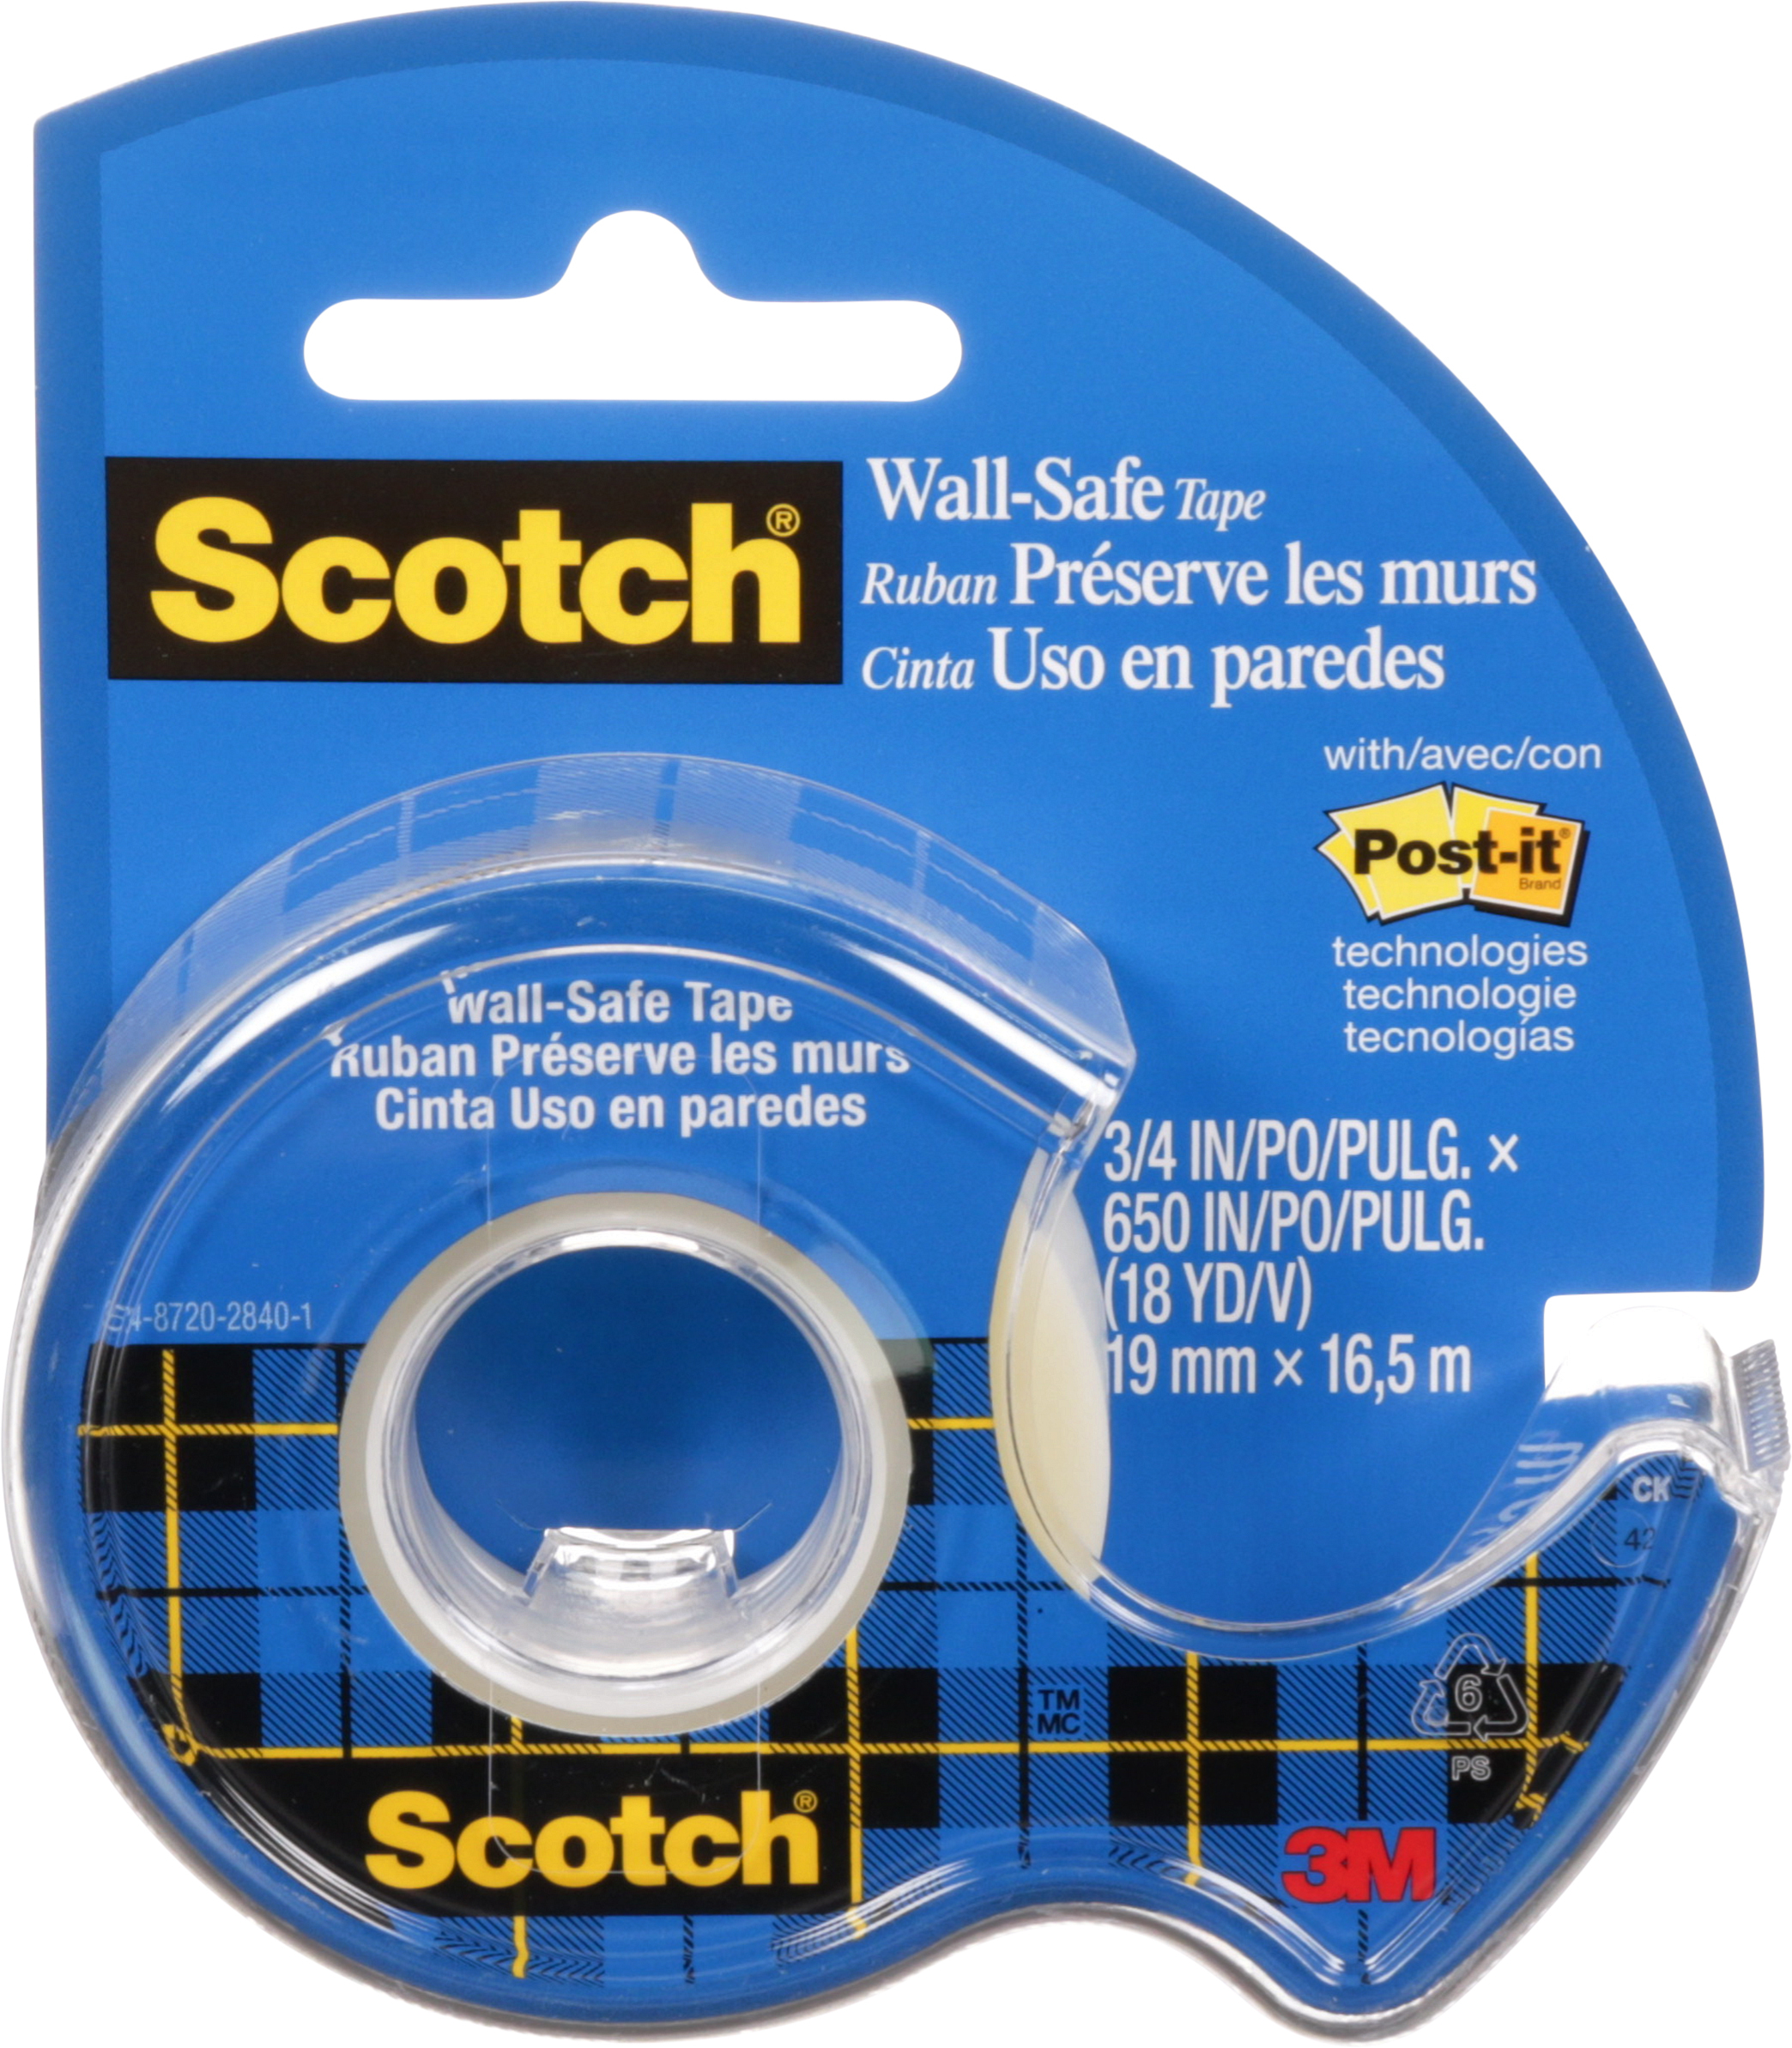 SCOTCH Wall Safe Tape 19mmx16,5m 183-EFDG incl. 1 Tape incl. 1 Tape